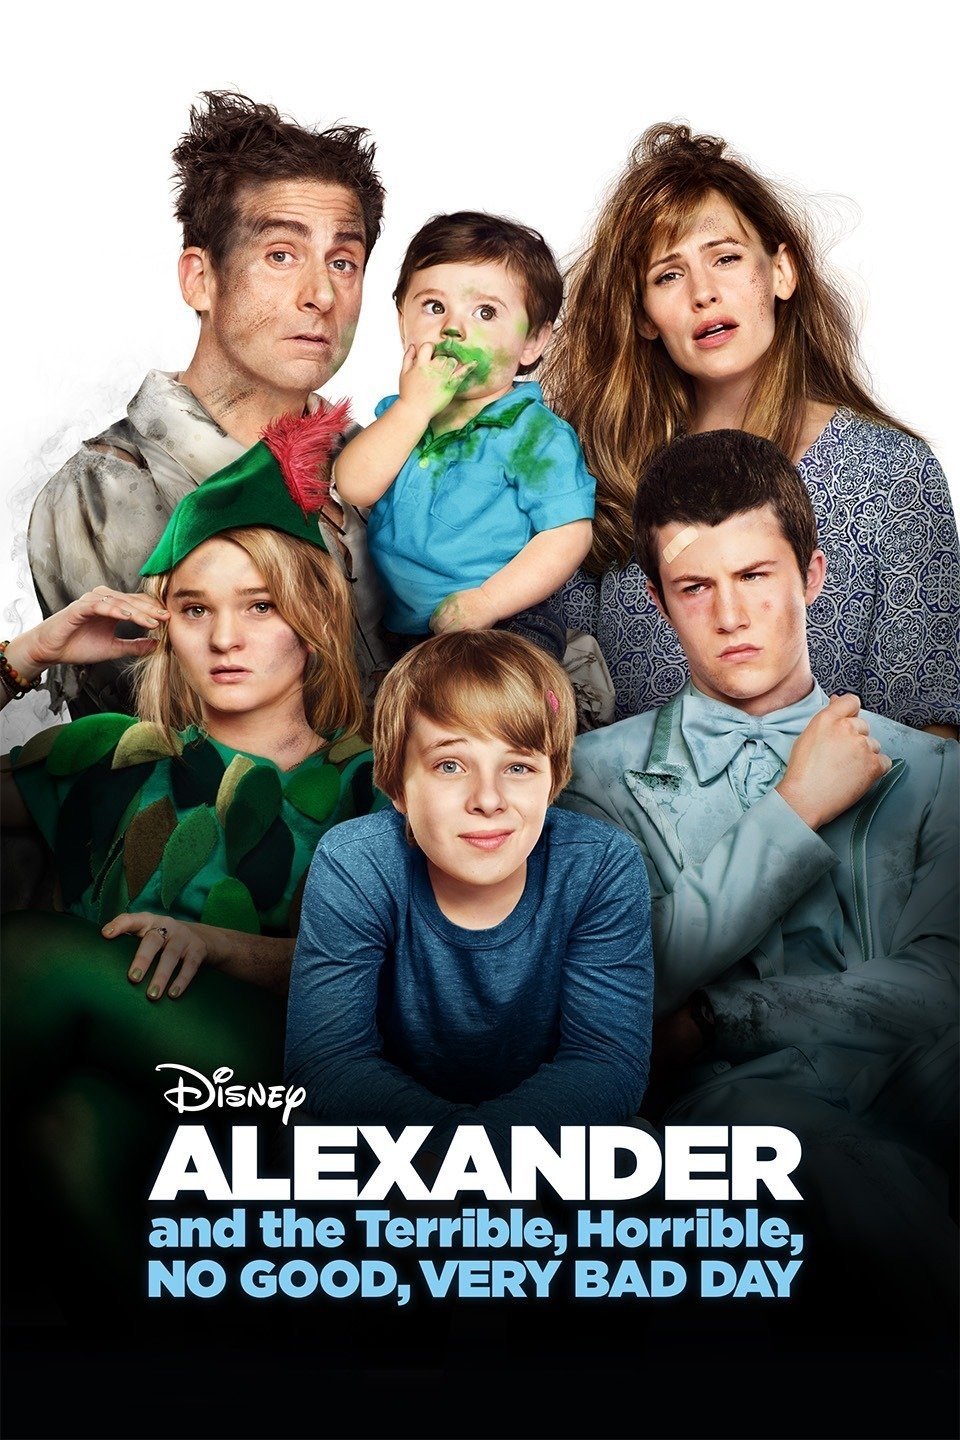 Alexander and the Terrible, Horrible, No Good, Very Bad Day (2014) Vudu or Movies Anywhere HD redemption only